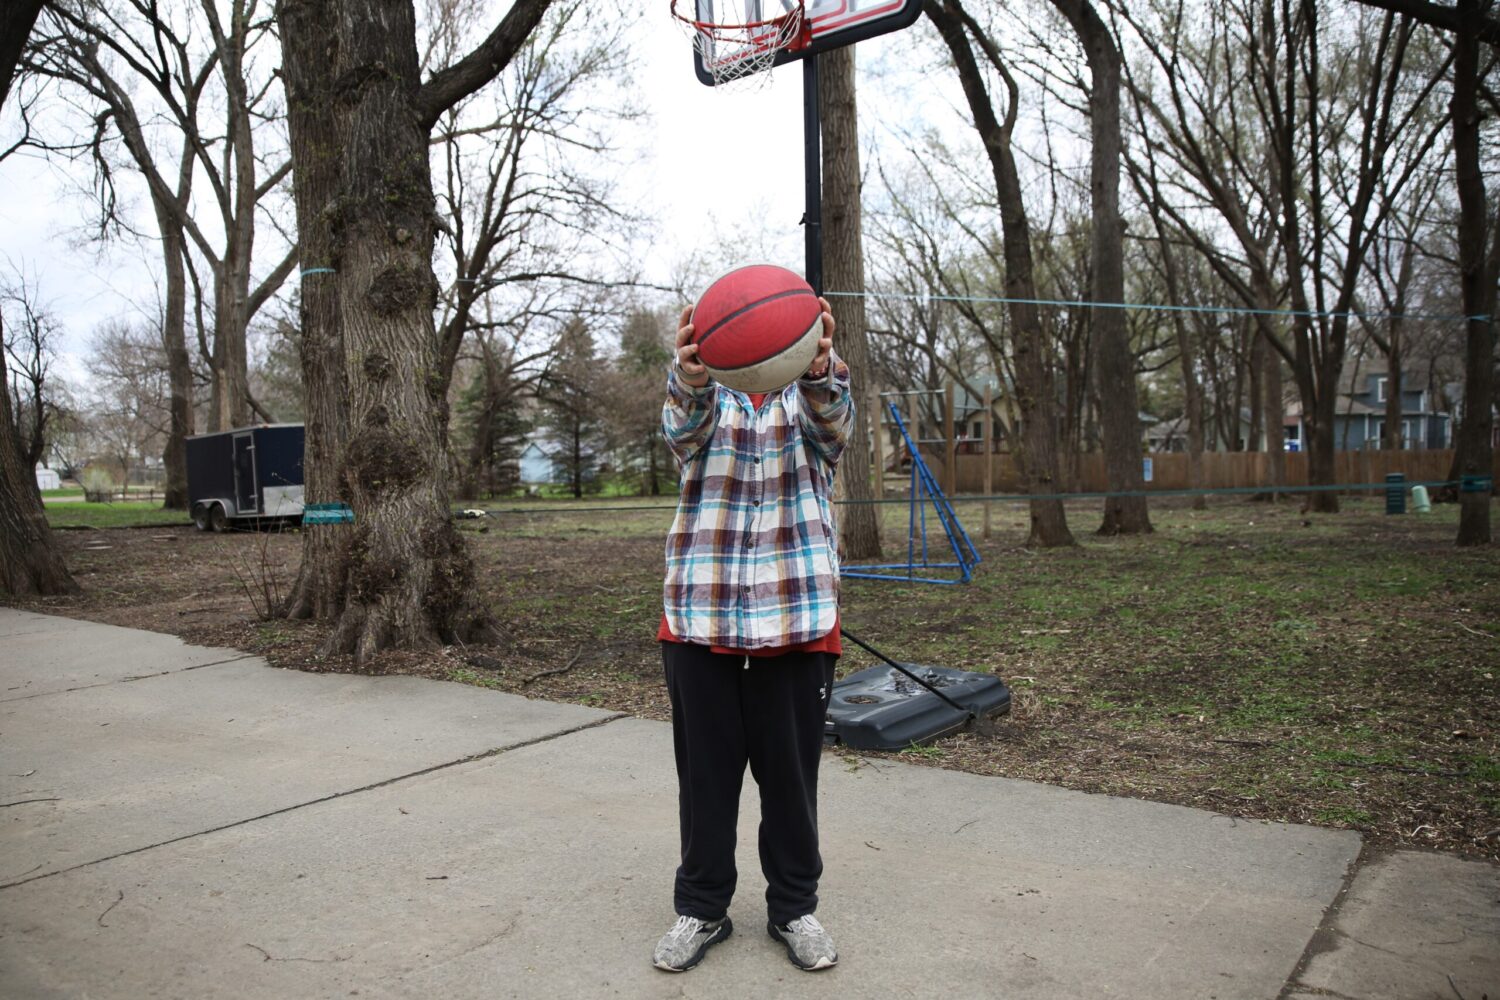 Joey plays basketball with his father in their driveway. He is one South Dakota child impacted by the state’s gender-affirming care ban for trans kids, which has been implemented in several surrounding states. South Dakota Searchlight photo by Makenzie Huber